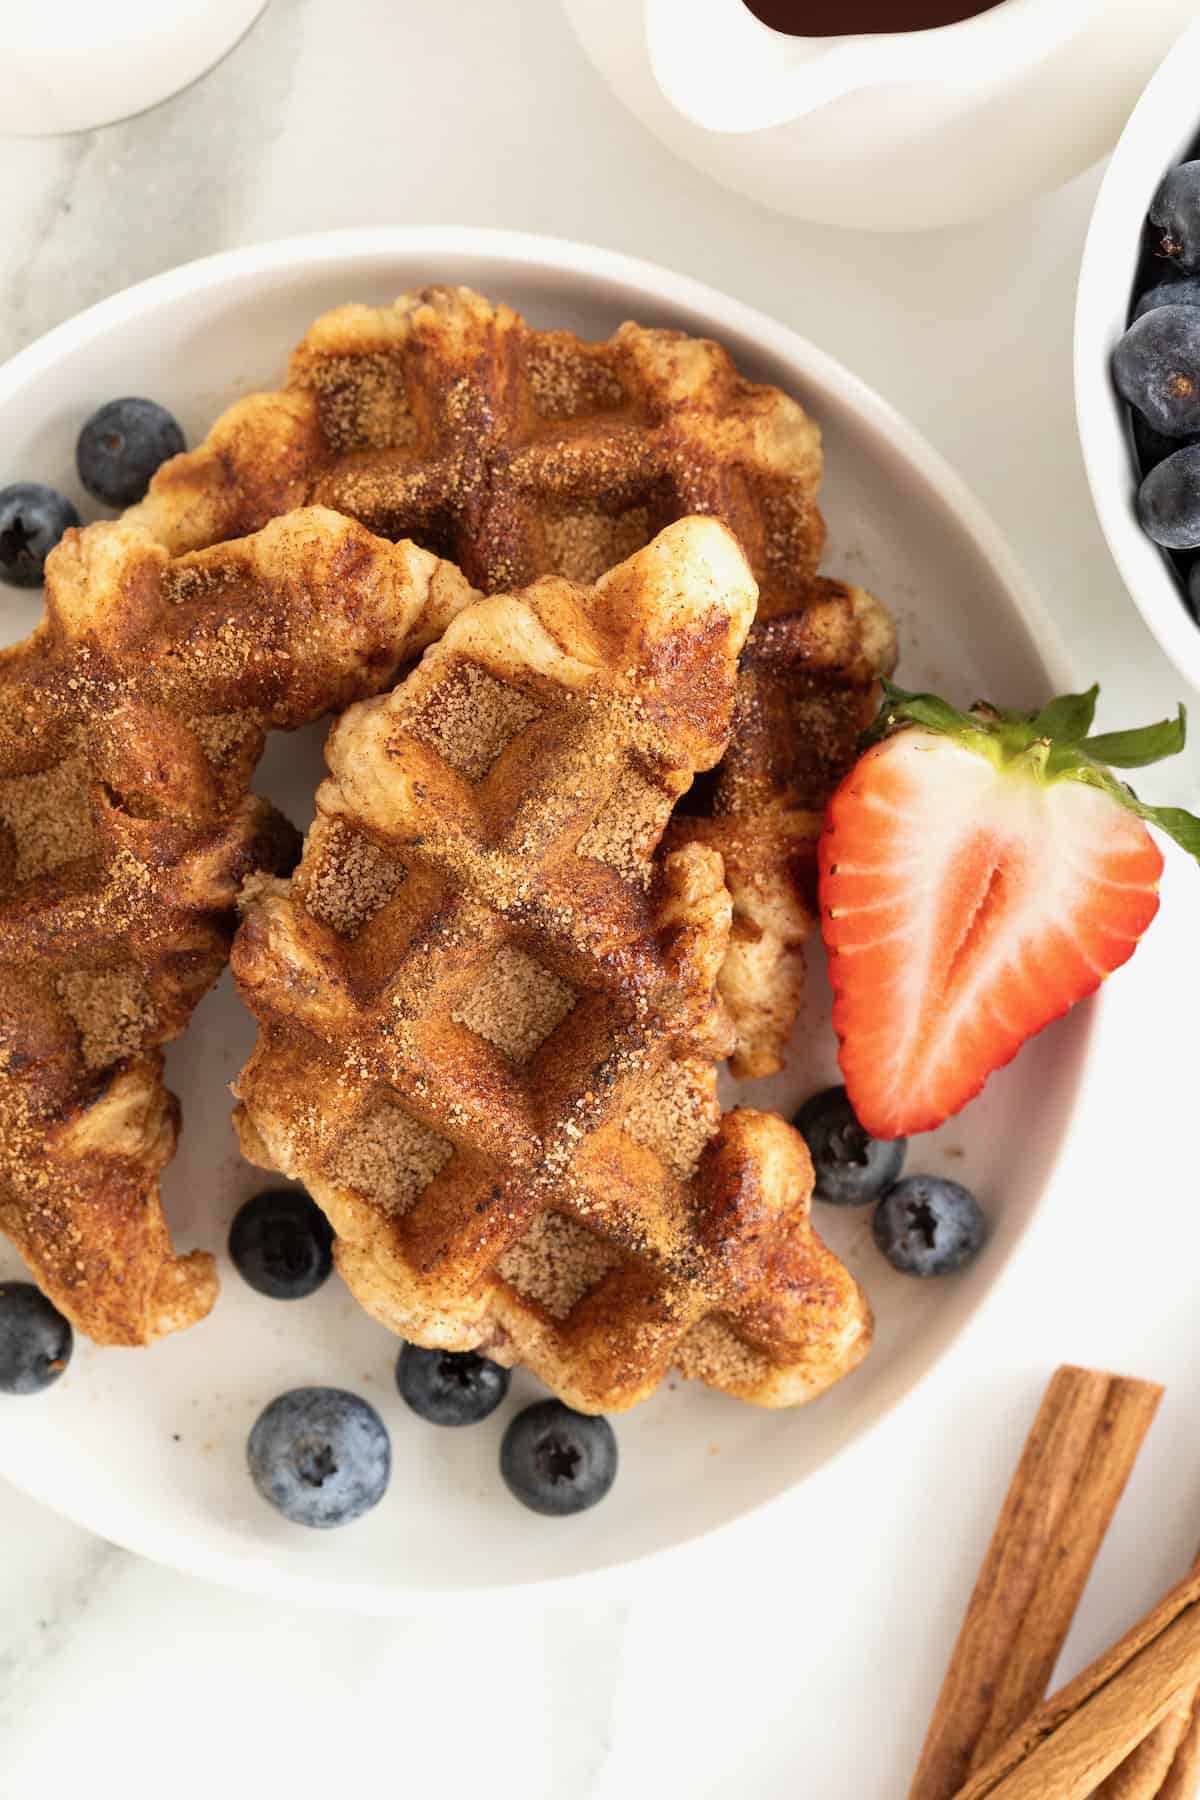 Cinnamon sugar croffles on a white rimmed plate surrounded by several blueberries and a strawberry half.